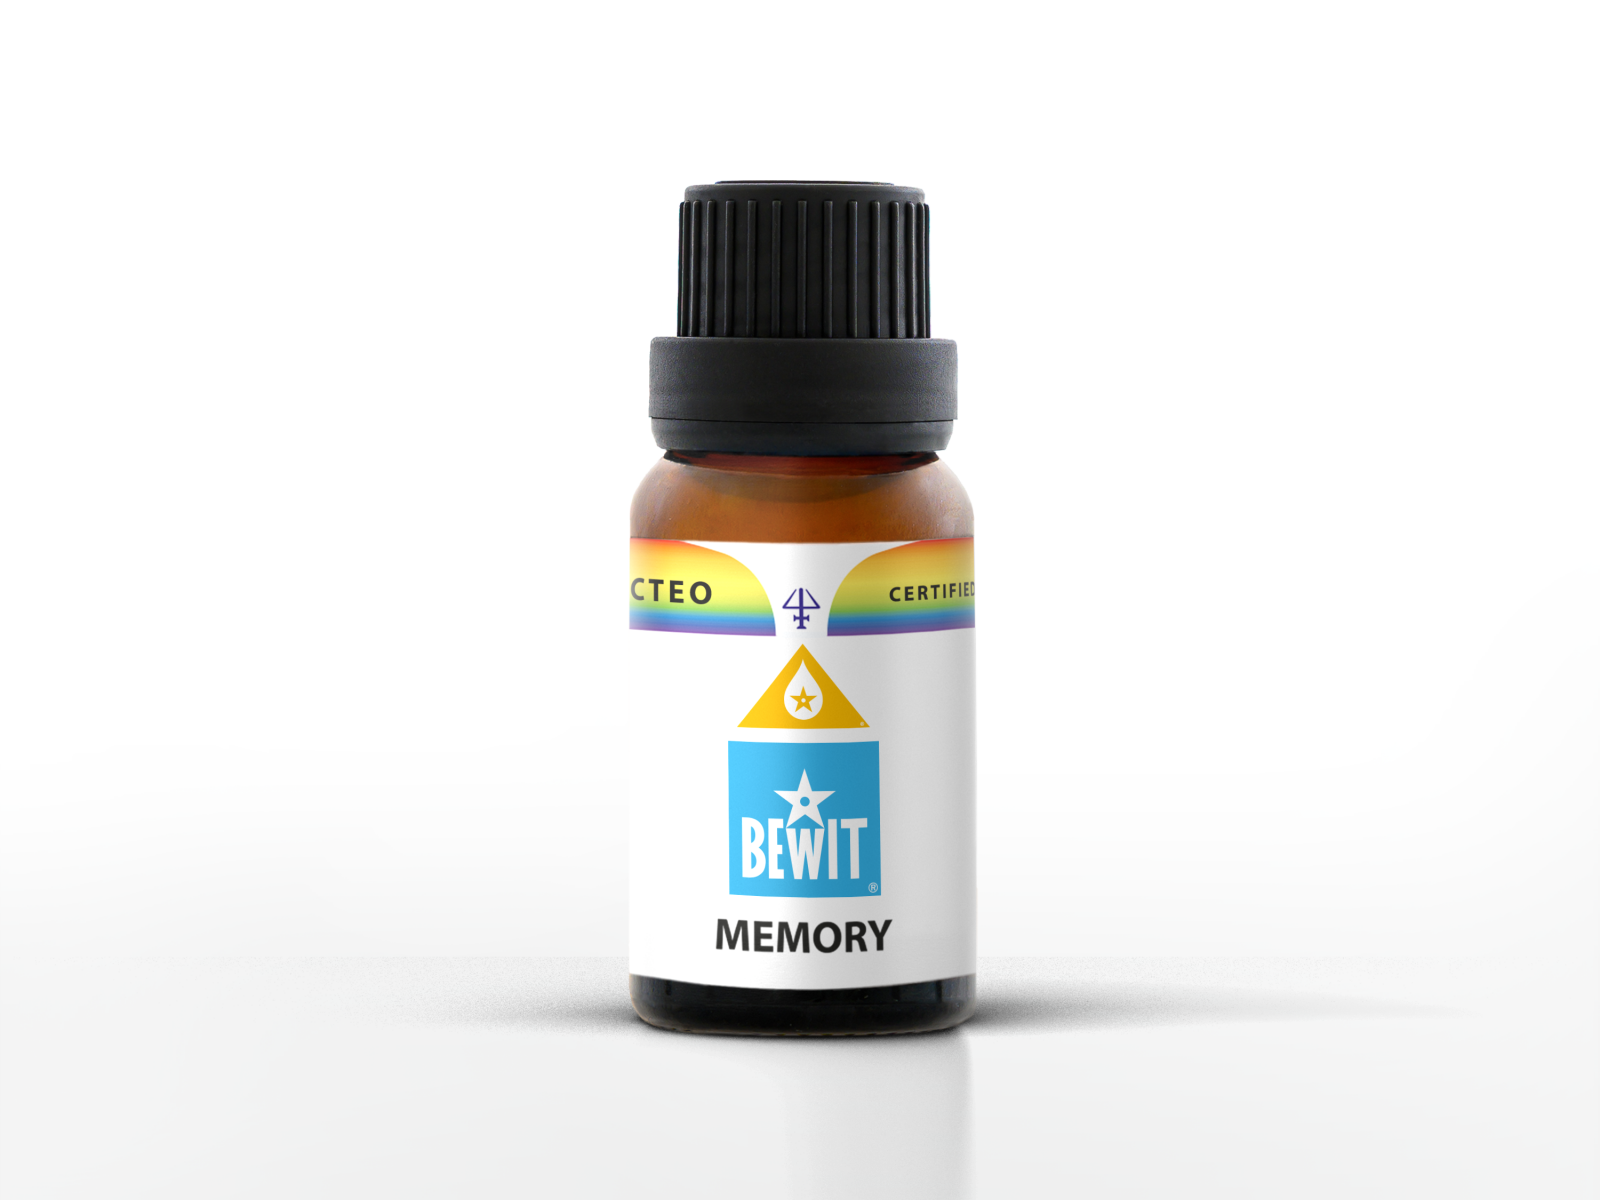 BEWIT MEMORY - Blend of essential oils